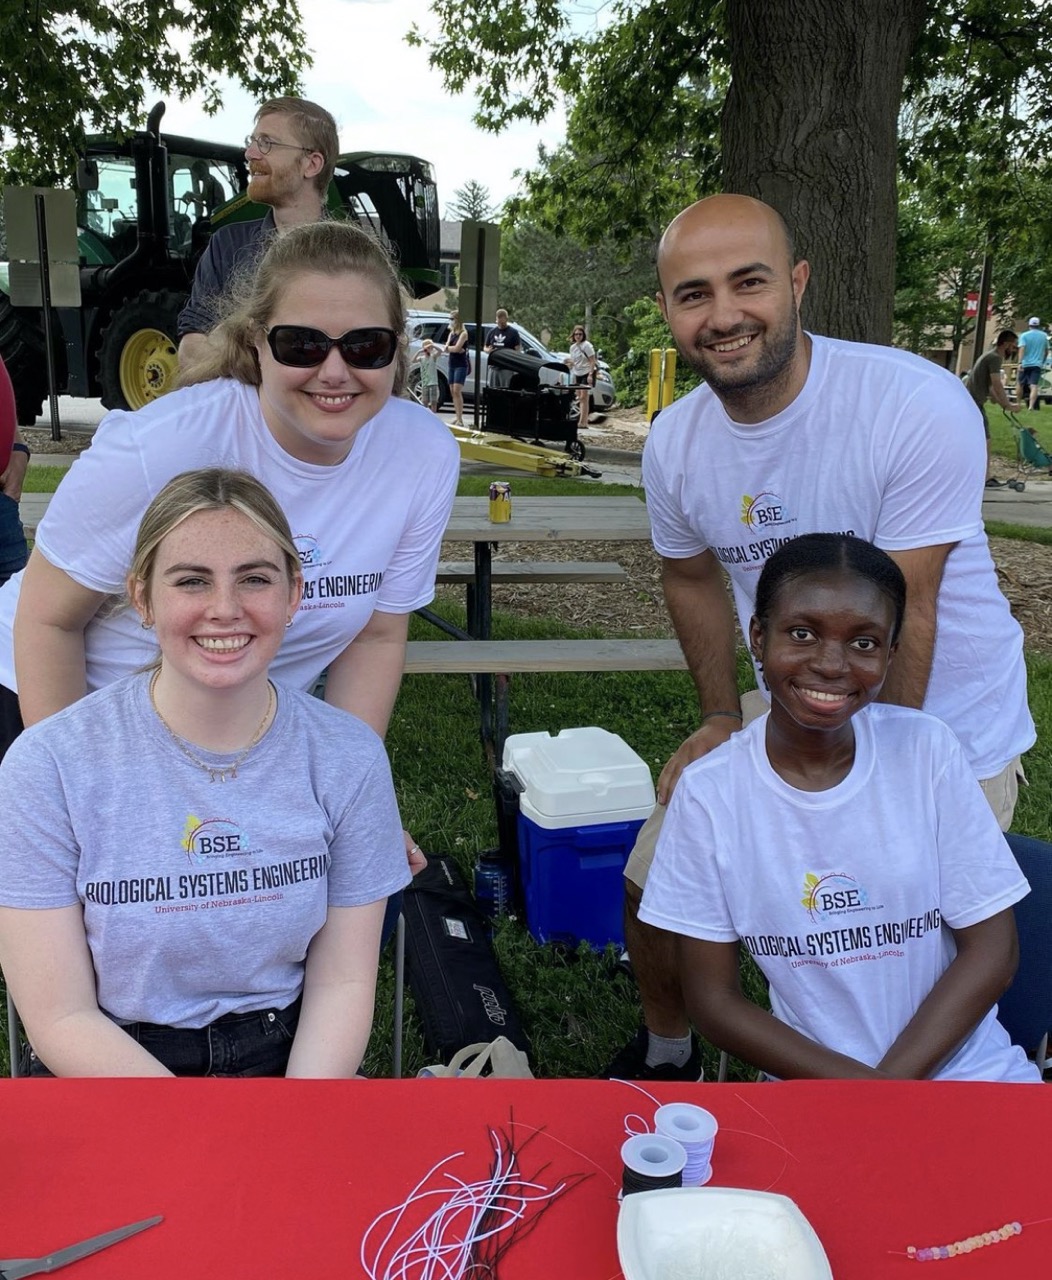 Dr. Iverson, Portia Plange, Omer Sadak, Carley Conover, and Ivon Acosta Ramirez (not shown) teaching kids about the importance of sunblock at UNL Discovery Days on East Campus. (June 2022)